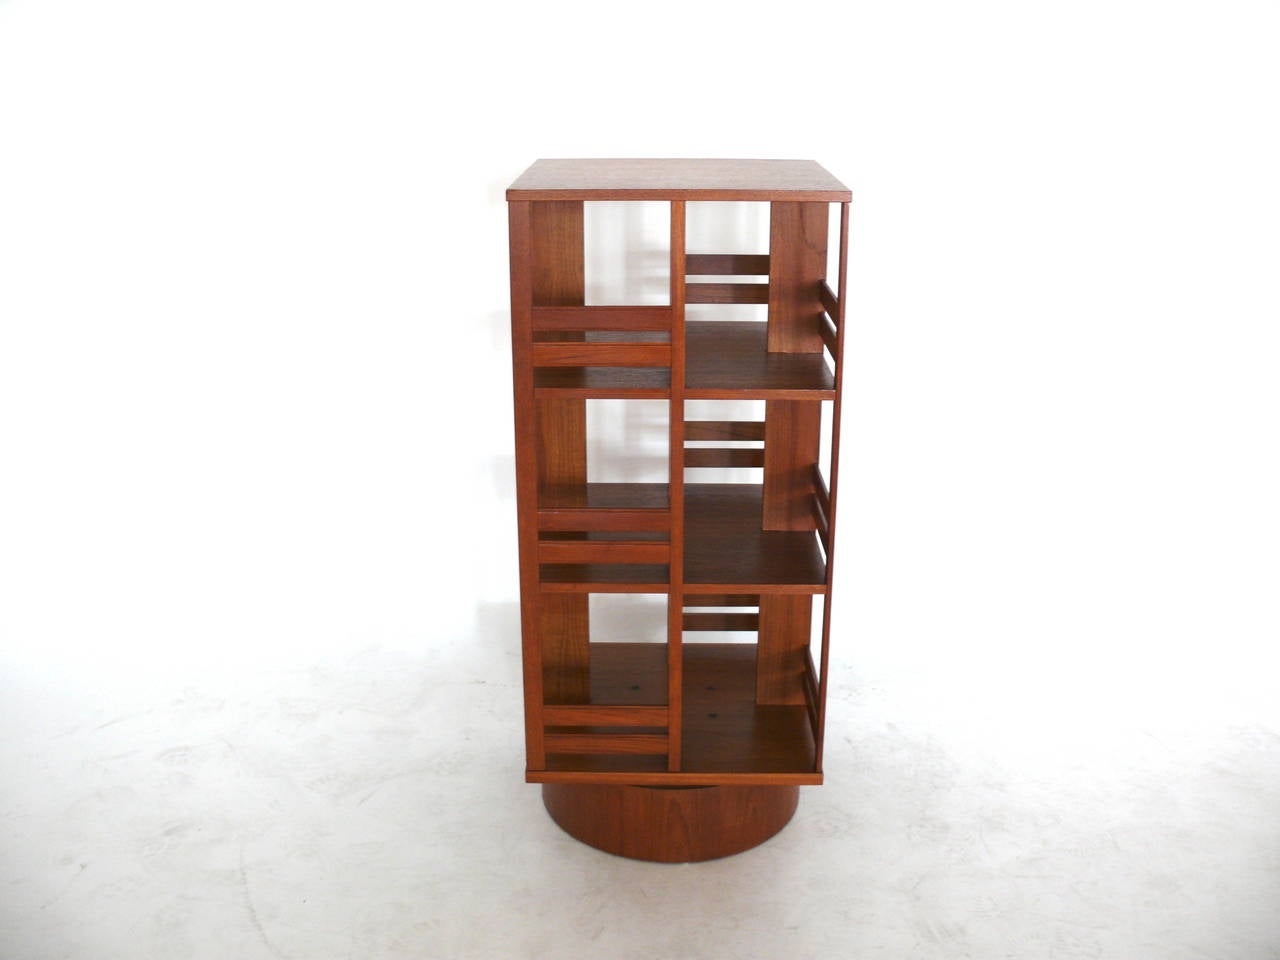 Handsome arts and crafts inspired bookshelf on thick mahogany base. 12 total compartments perfect for displaying books. Bookshelf revolves 360 degrees. Original vintage condition. Perfect for the library or kid's room.